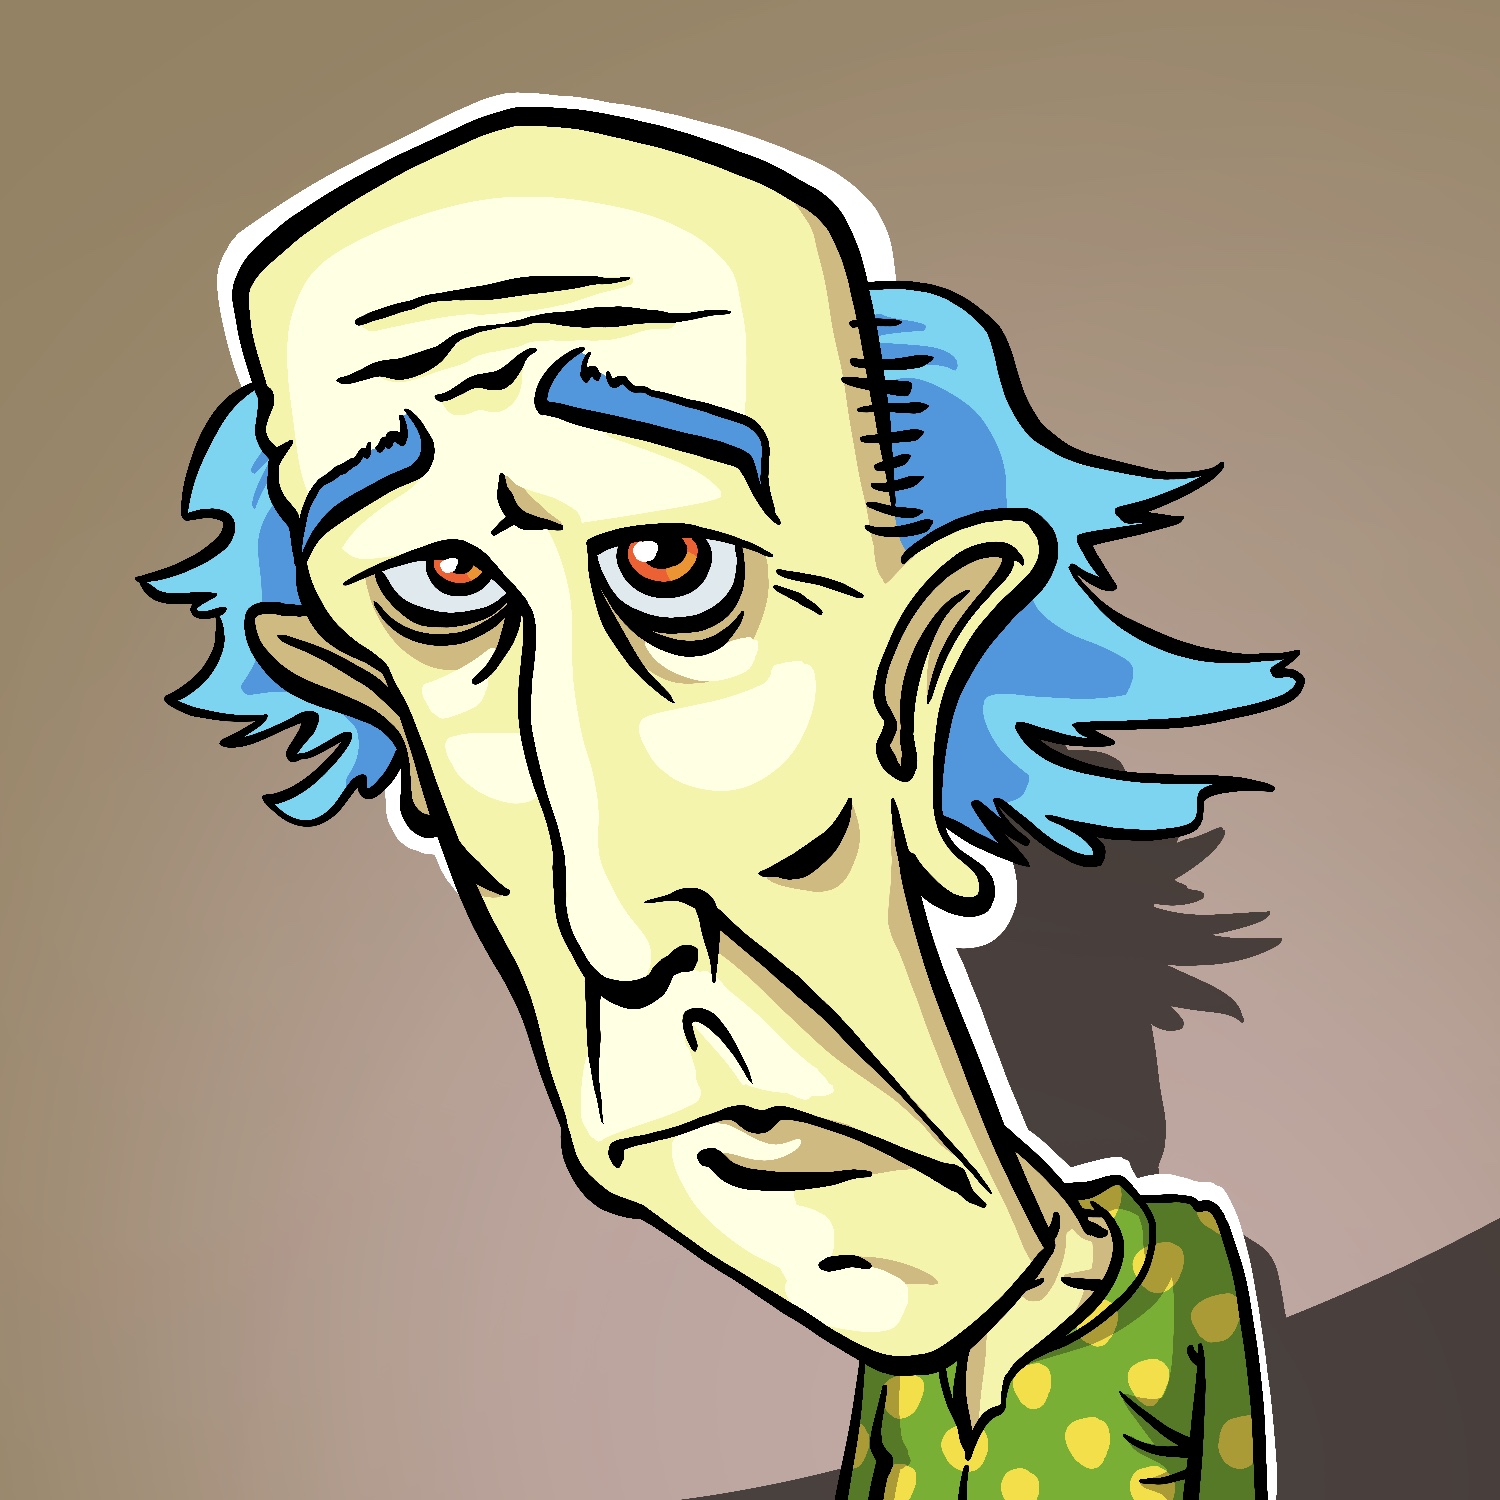 An illustration of an old man with a long, distorted face. The man has a light, green-yellow complexion, red eyes, and scraggly blue hair with a bald top. He looks gaunt and has a neutral expression on his face. He is facing to the left and his head is distorted forward at the top. He is wearing a green and yellow polka-dot shirt that is open near the top, and a harsh light illuminates him from the left.